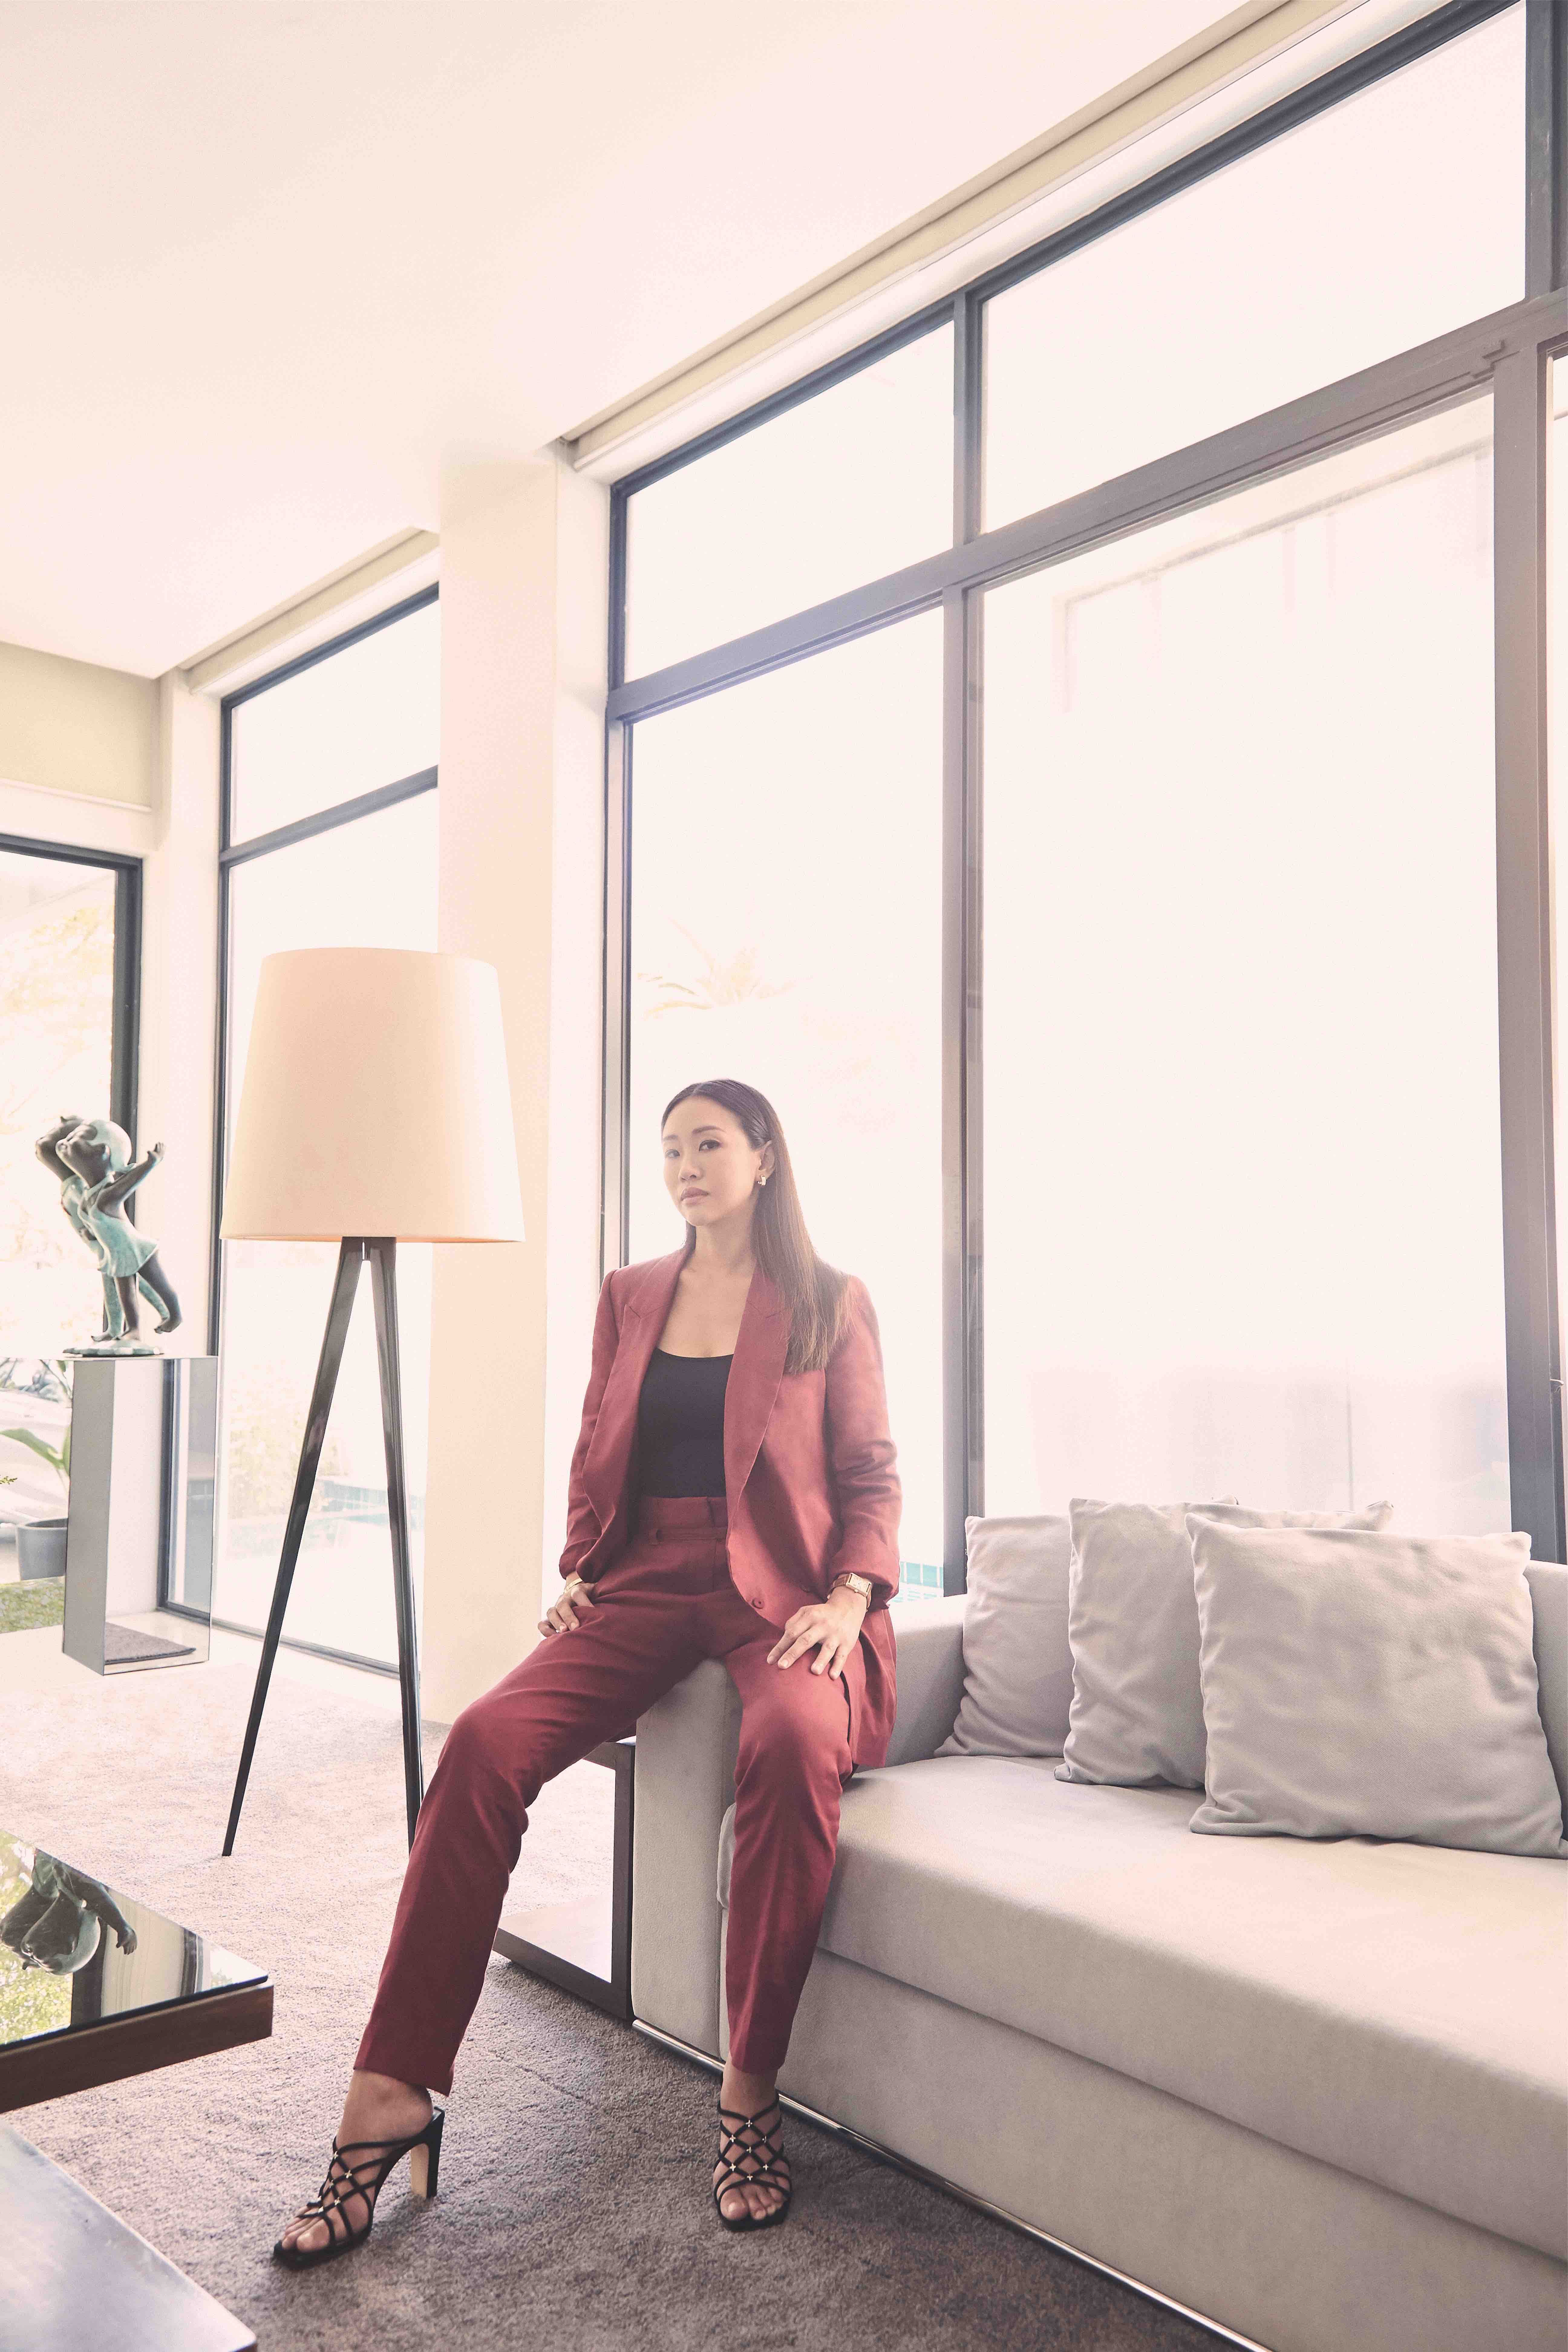 Sharon Sim is wearing a burgundy red linen pant suit from Brunello Cucinelli. All accessories and watches are from Cartier.